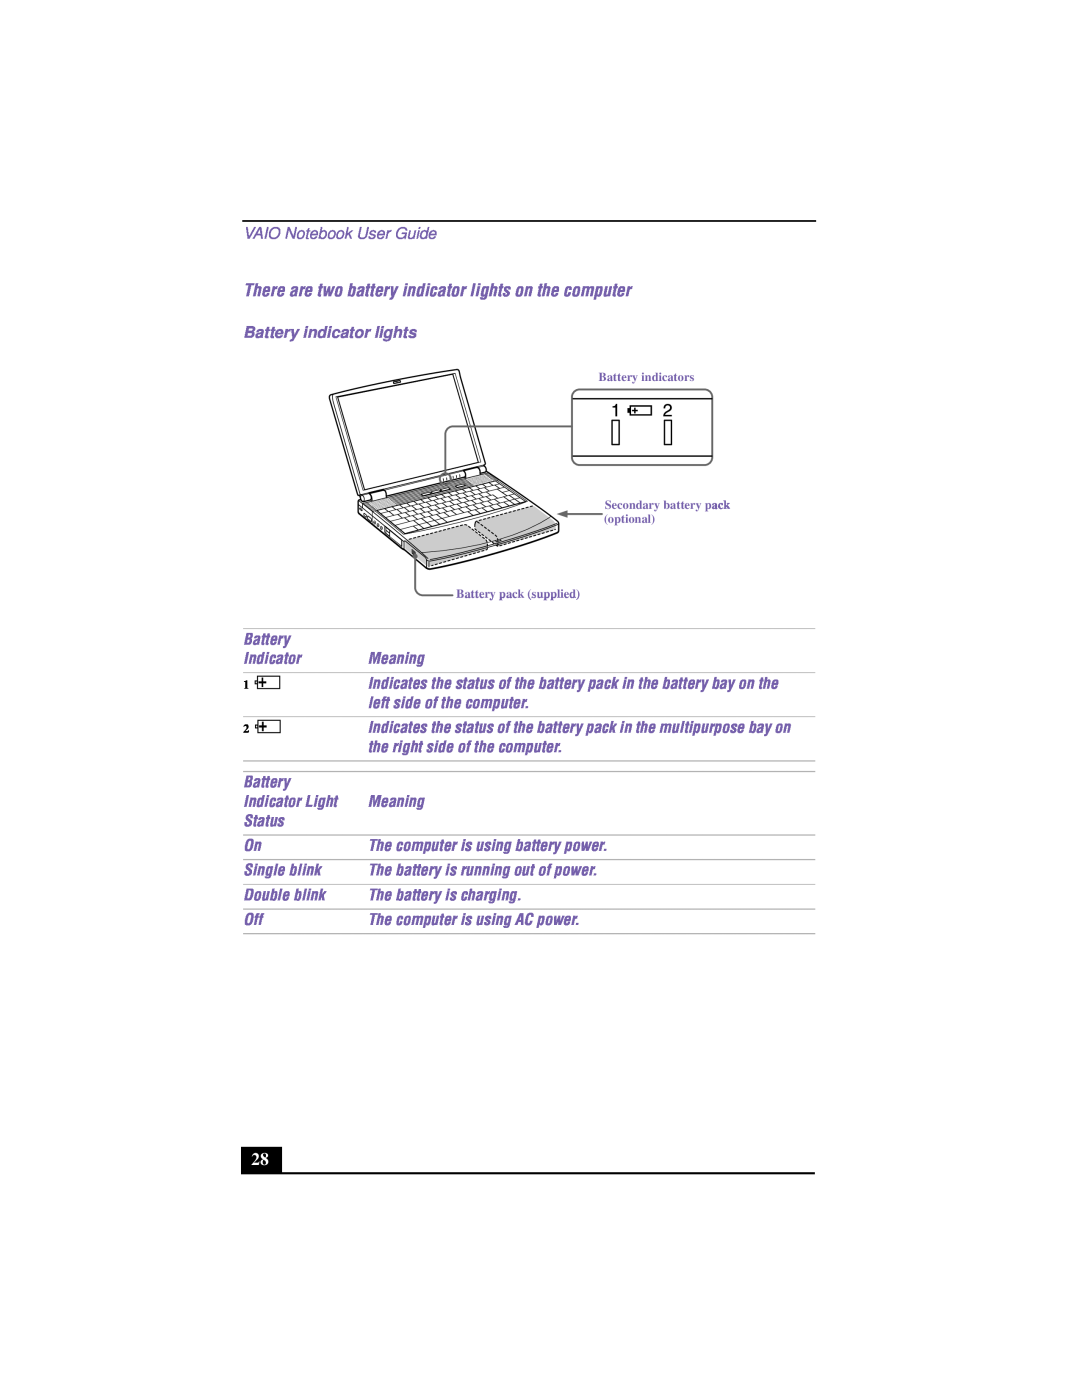 Sony PCG-F640 manual There are two battery indicator lights on the computer, VAIO Notebook User Guide, Battery indicators 